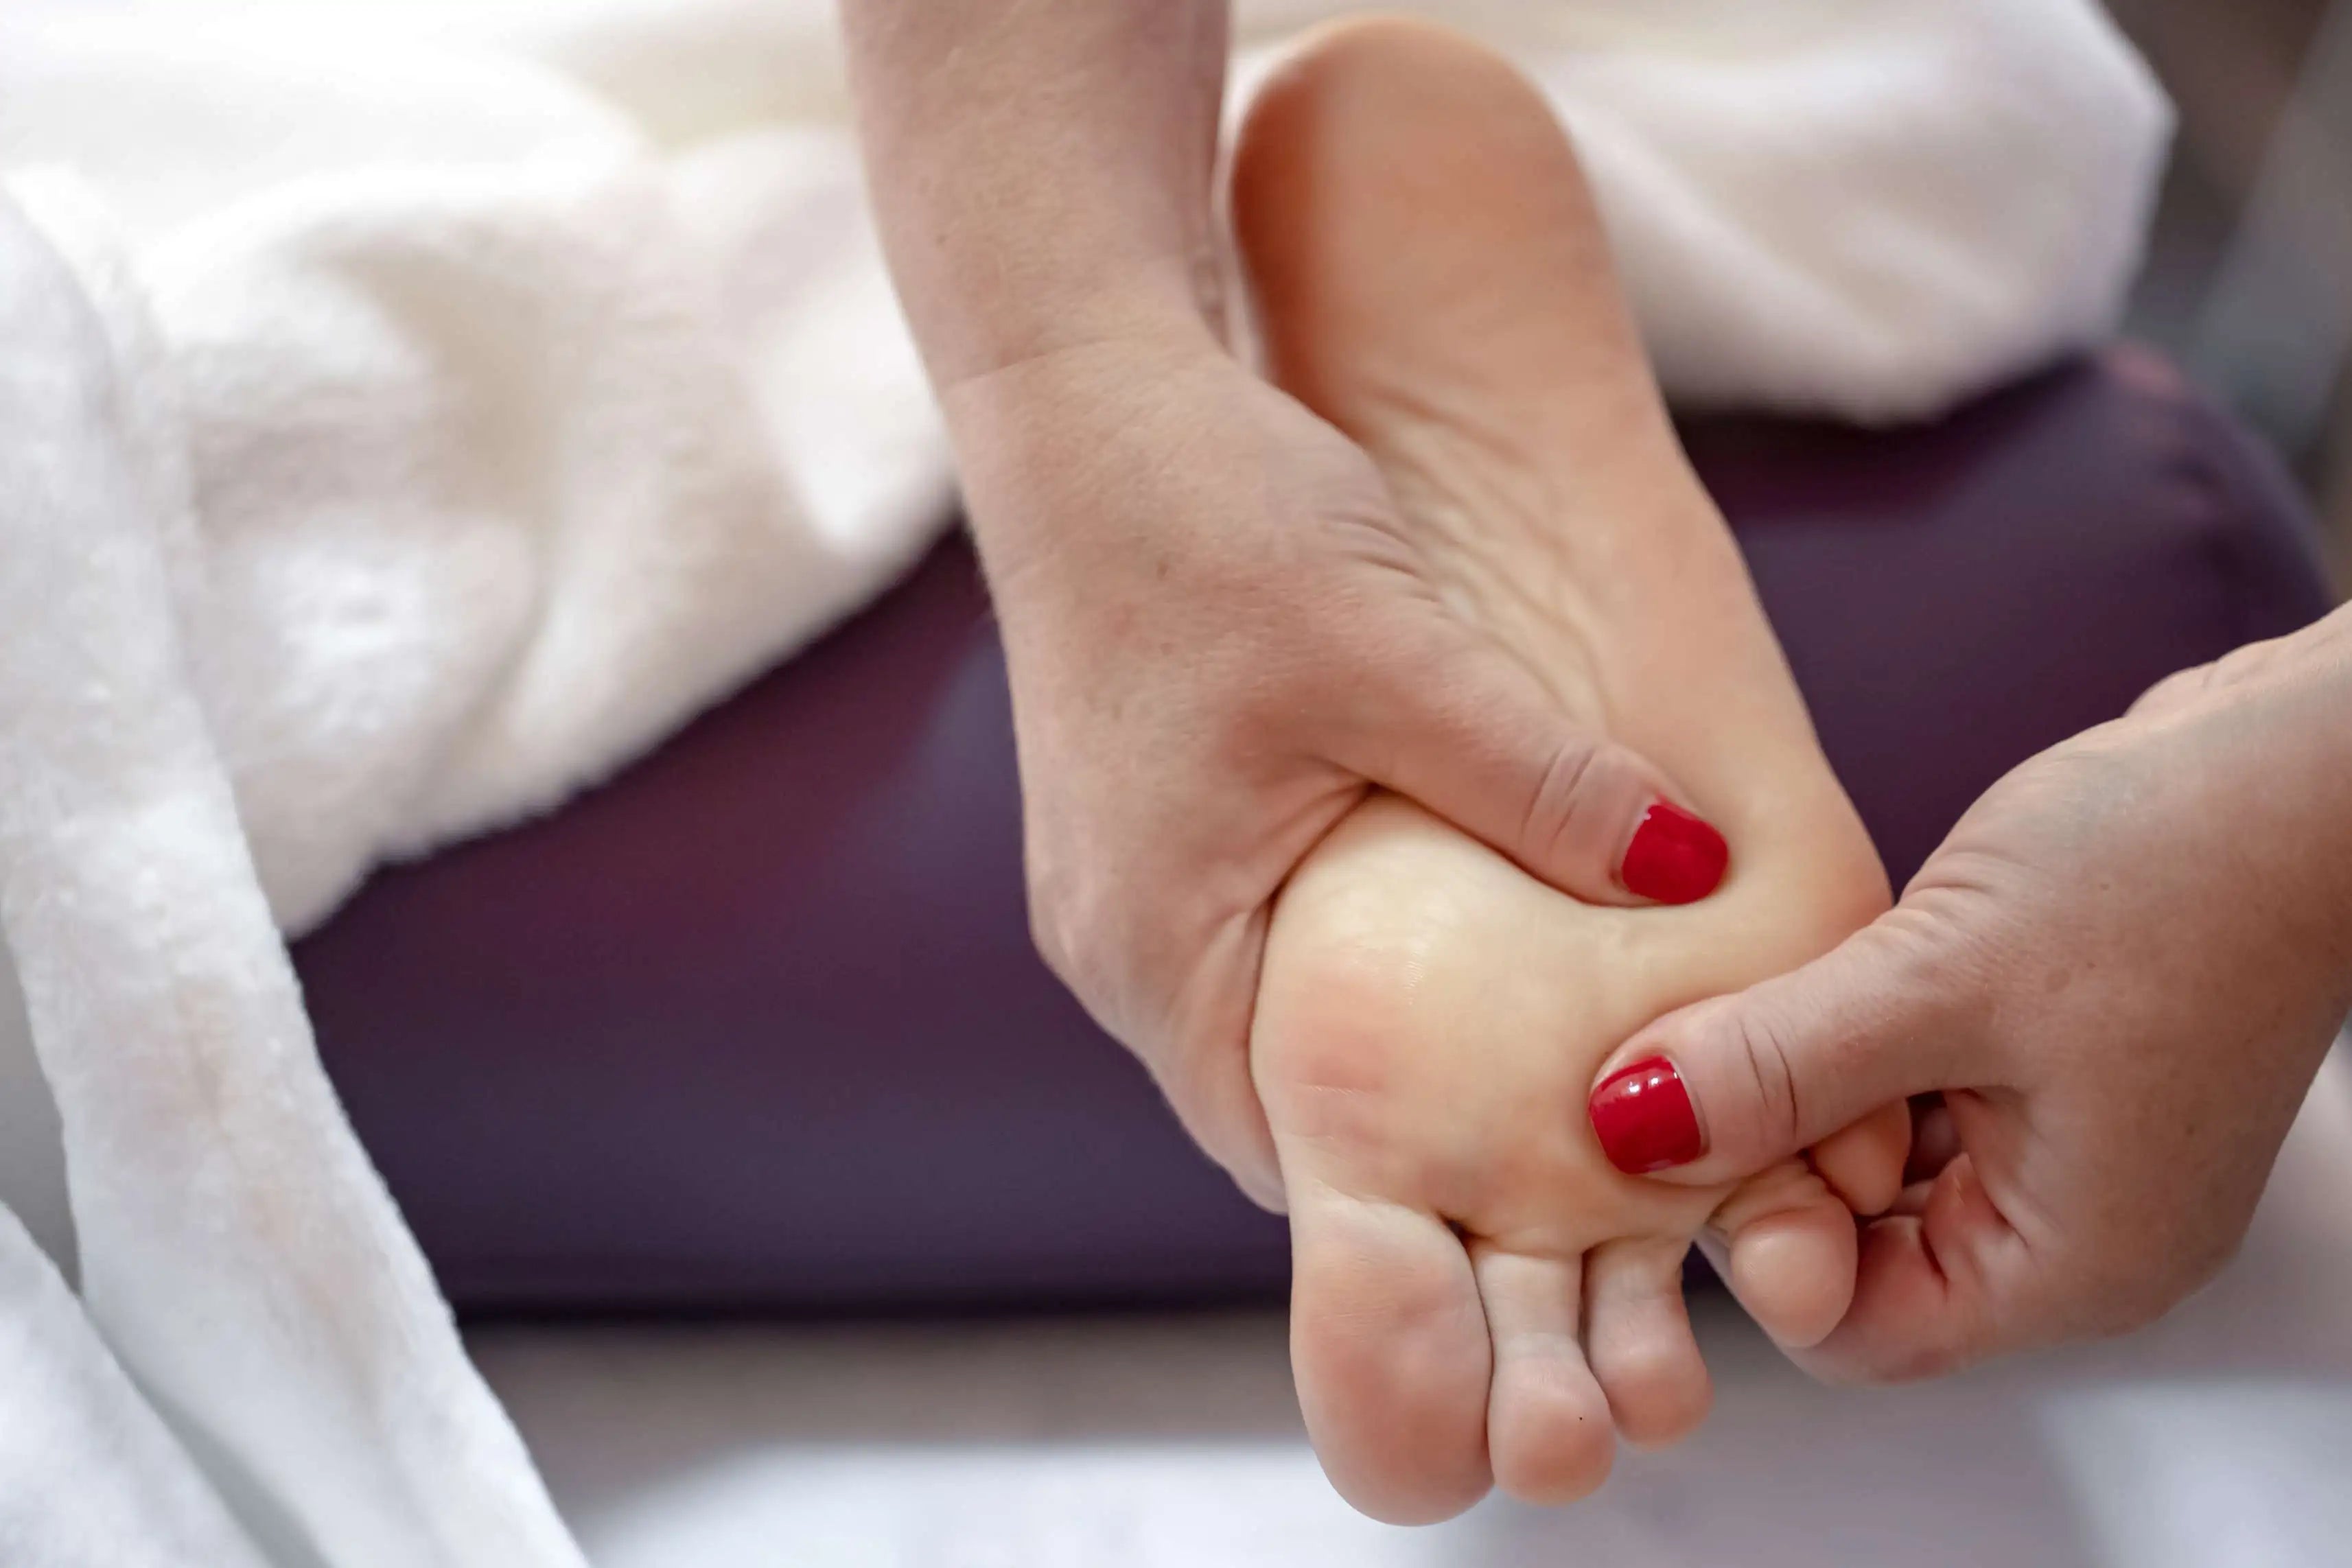 7 Effective Ways to Treat Bunions Without Surgery